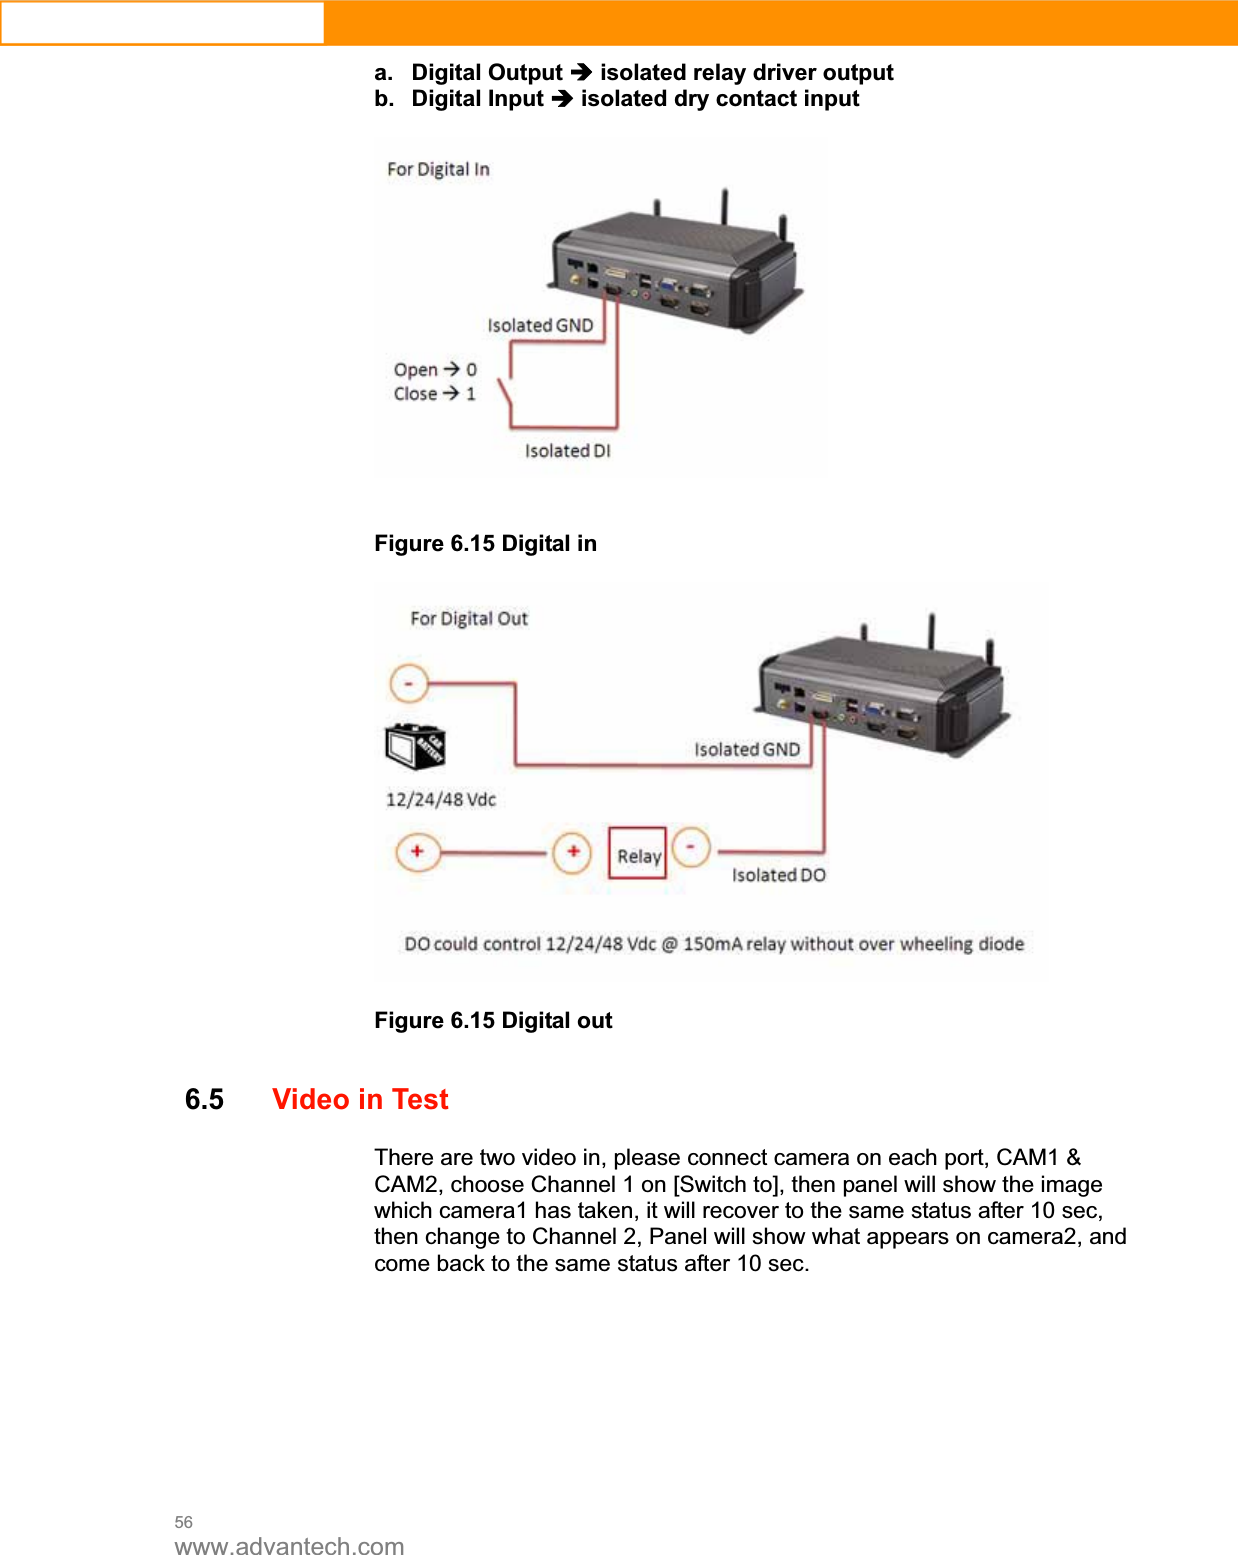 56www.advantech.coma. Digital Output Î isolated relay driver output b. Digital Input Î isolated dry contact input Figure 6.15 Digital in Figure 6.15 Digital out 6.5Video in Test There are two video in, please connect camera on each port, CAM1 &amp; CAM2, choose Channel 1 on [Switch to], then panel will show the image which camera1 has taken, it will recover to the same status after 10 sec, then change to Channel 2, Panel will show what appears on camera2, and come back to the same status after 10 sec.   